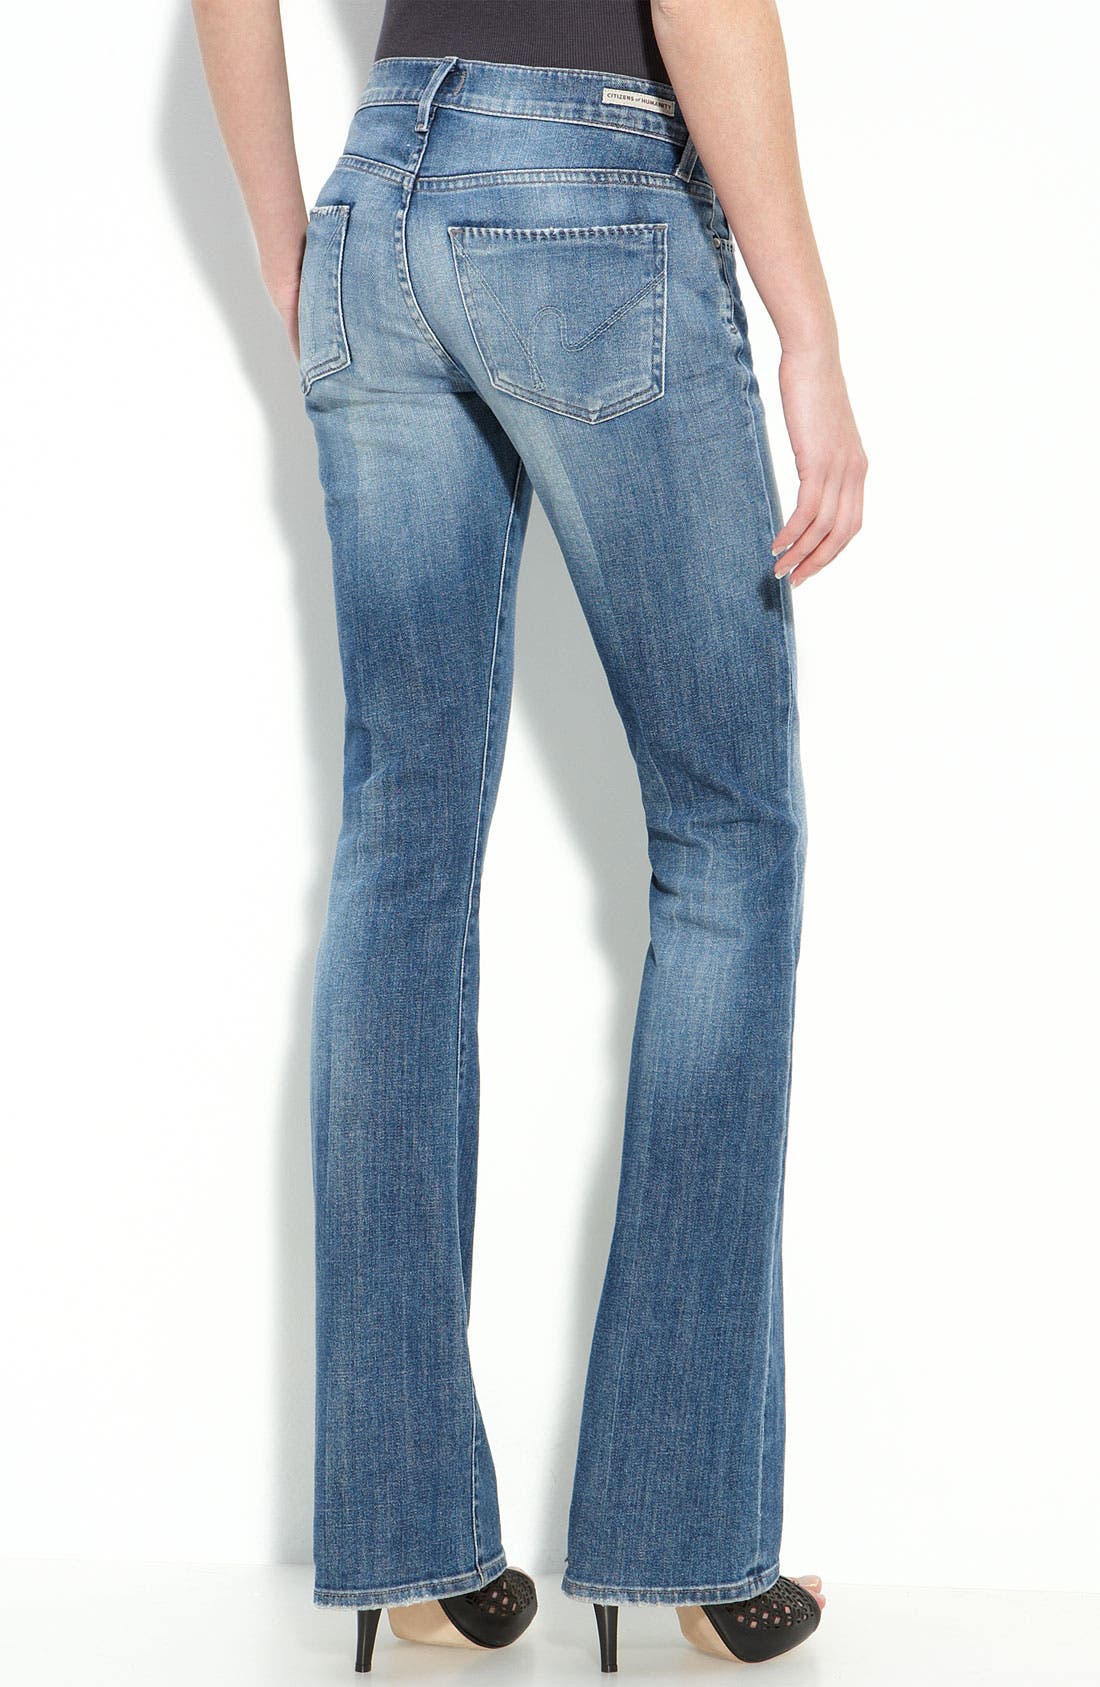 citizens of humanity jeans kelly 001 bootcut